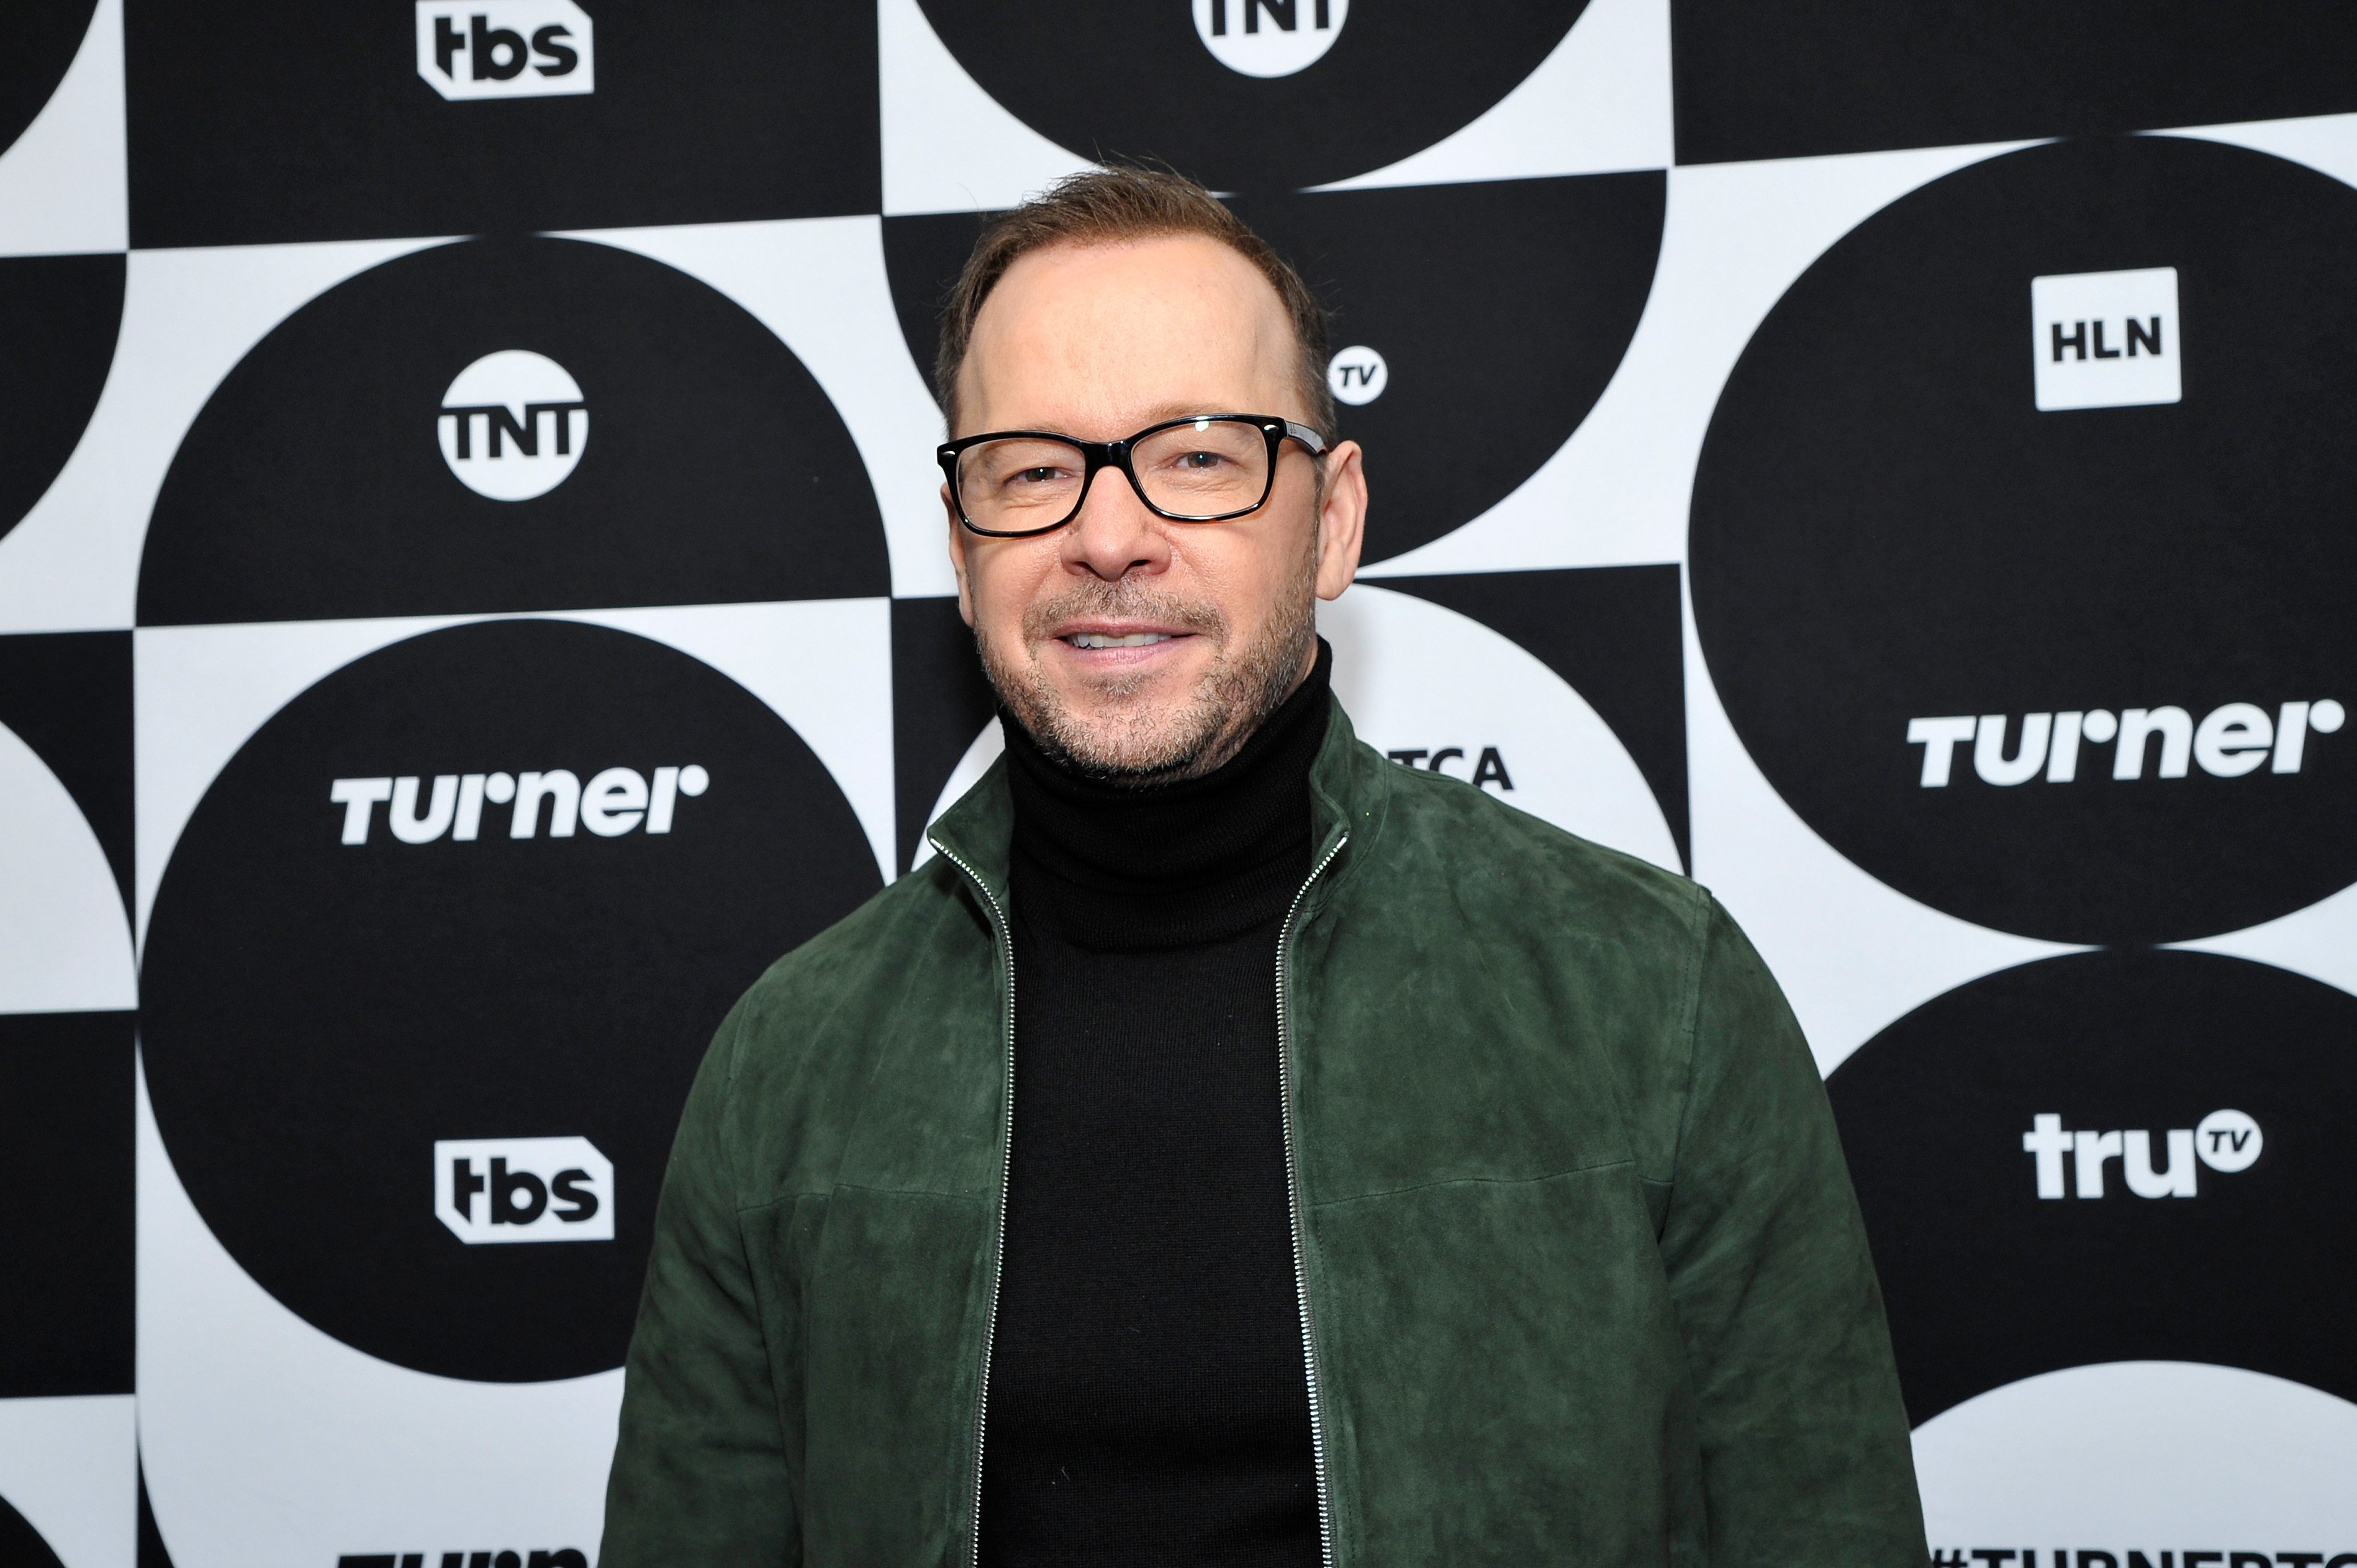 Donnie Wahlberg poses in the green room during the TCA Turner Winter Press Tour 2019 at The Langham Huntington Hotel and Spa on February 11, 2019, in Pasadena, California. | Source: Getty Images.